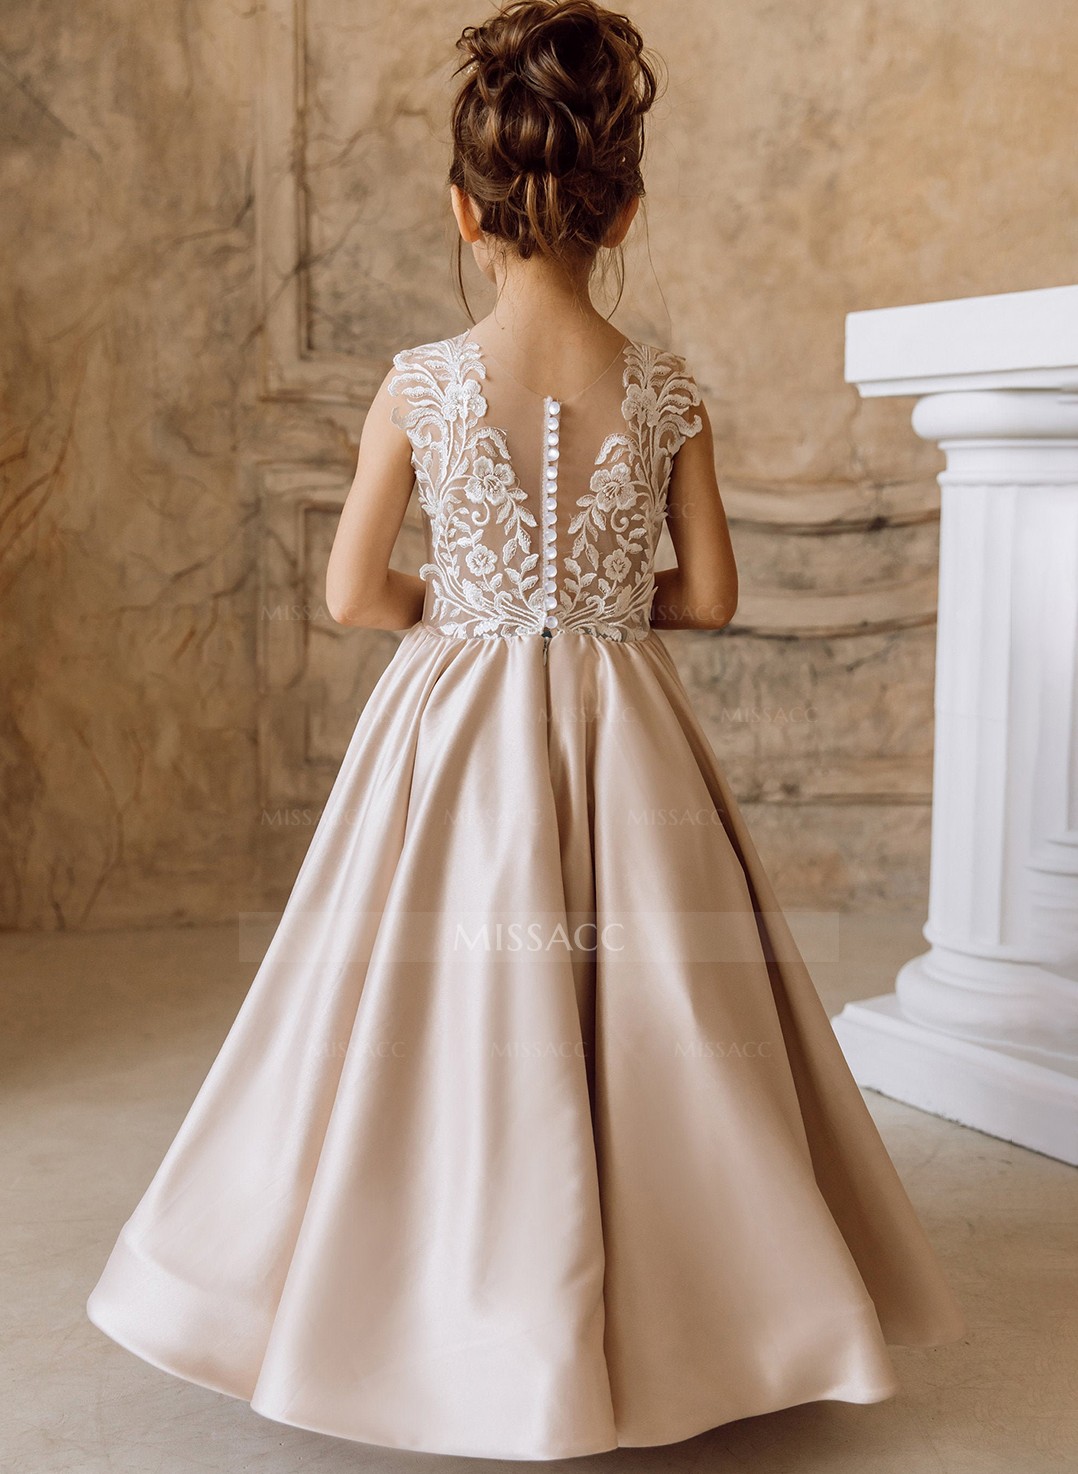 Ball-Gown/Princess Champagne Satin Lace Flower Girl Dresses